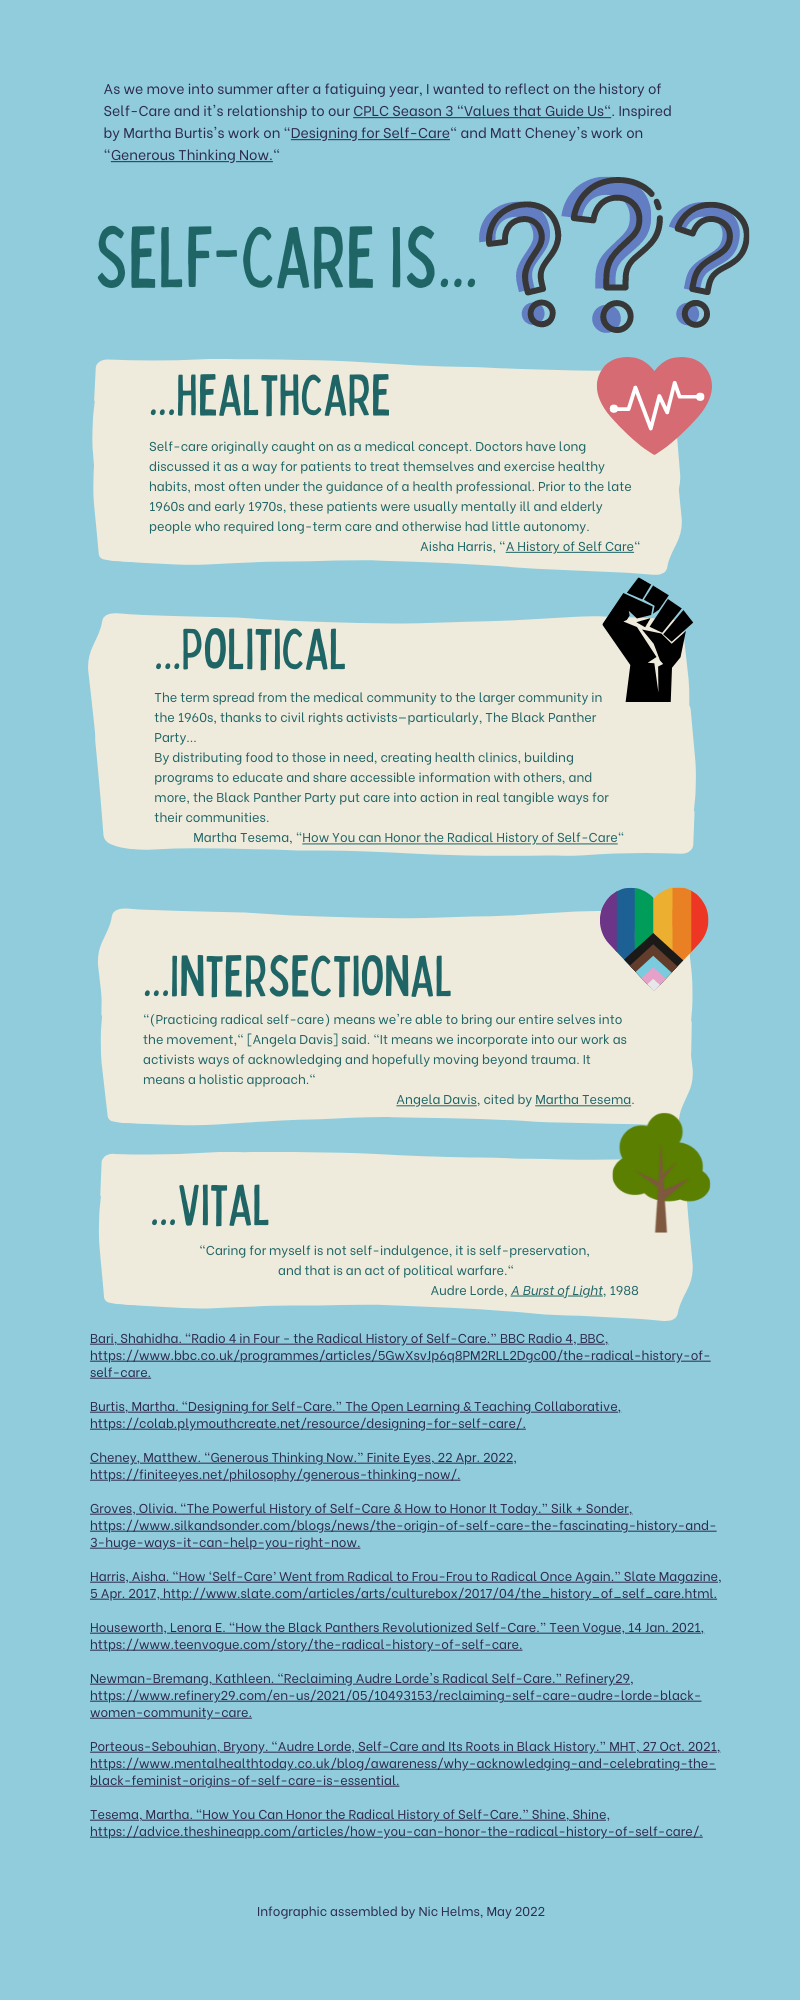 infographic about what self care is: healthcare, political, intersectional, vital